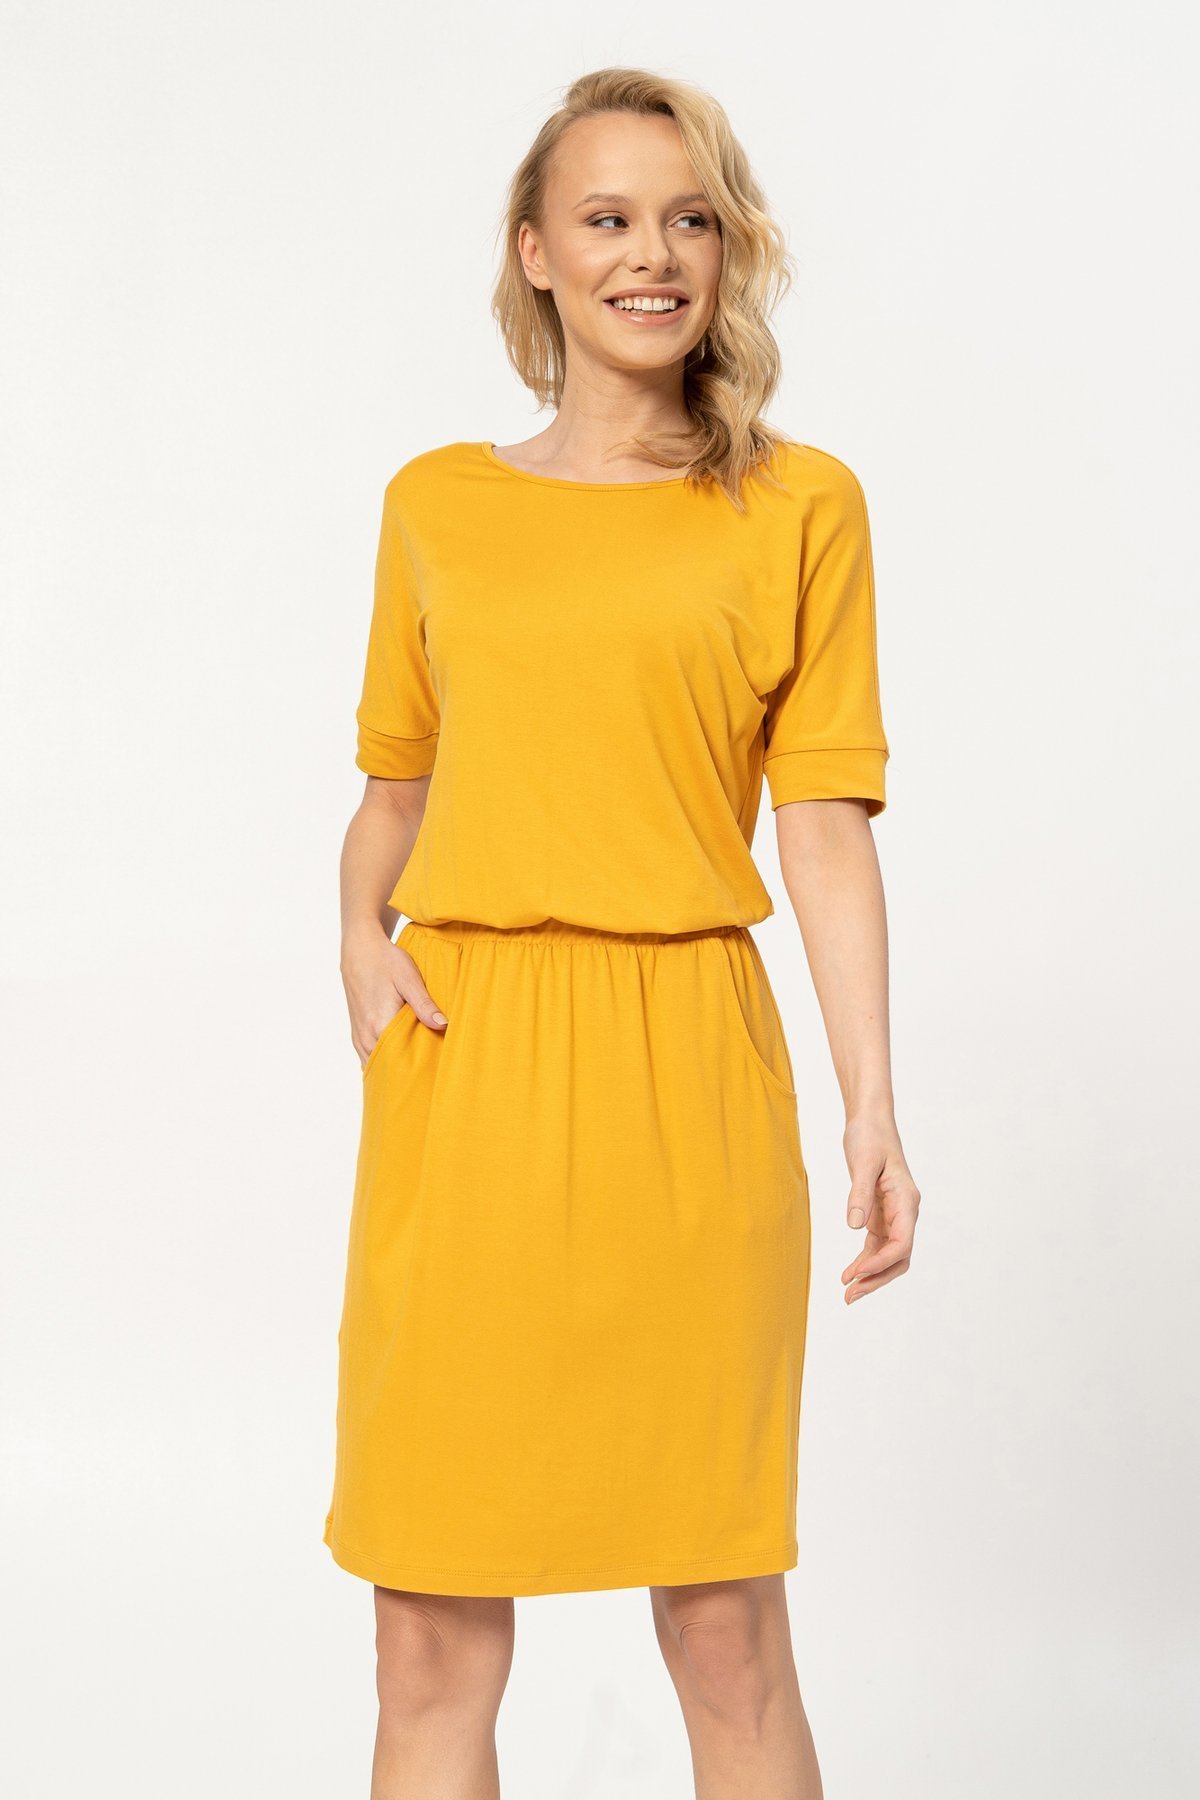 Casual dress sport style, yellow | Medical clothes COLORMED